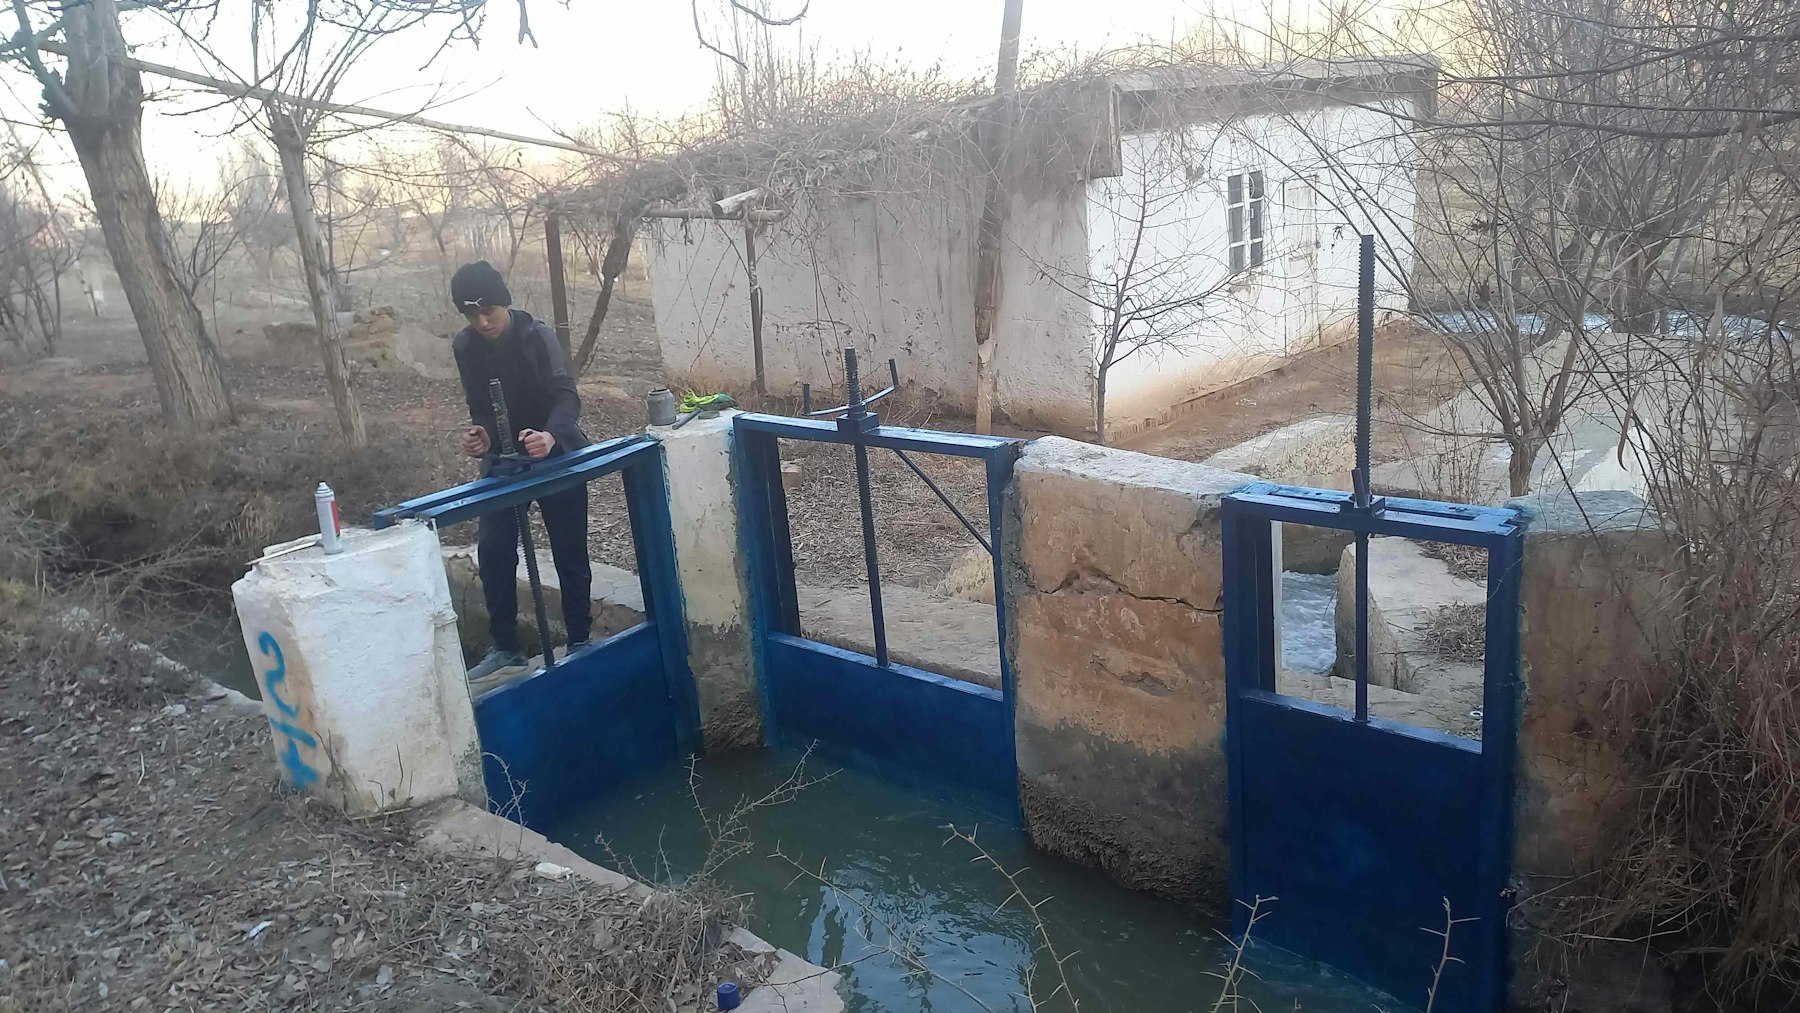 Rehabilitation of an irrigation channel in Baland, Sughd that draws water from the Isfara River, on the Tajik-Kyrgyz border.